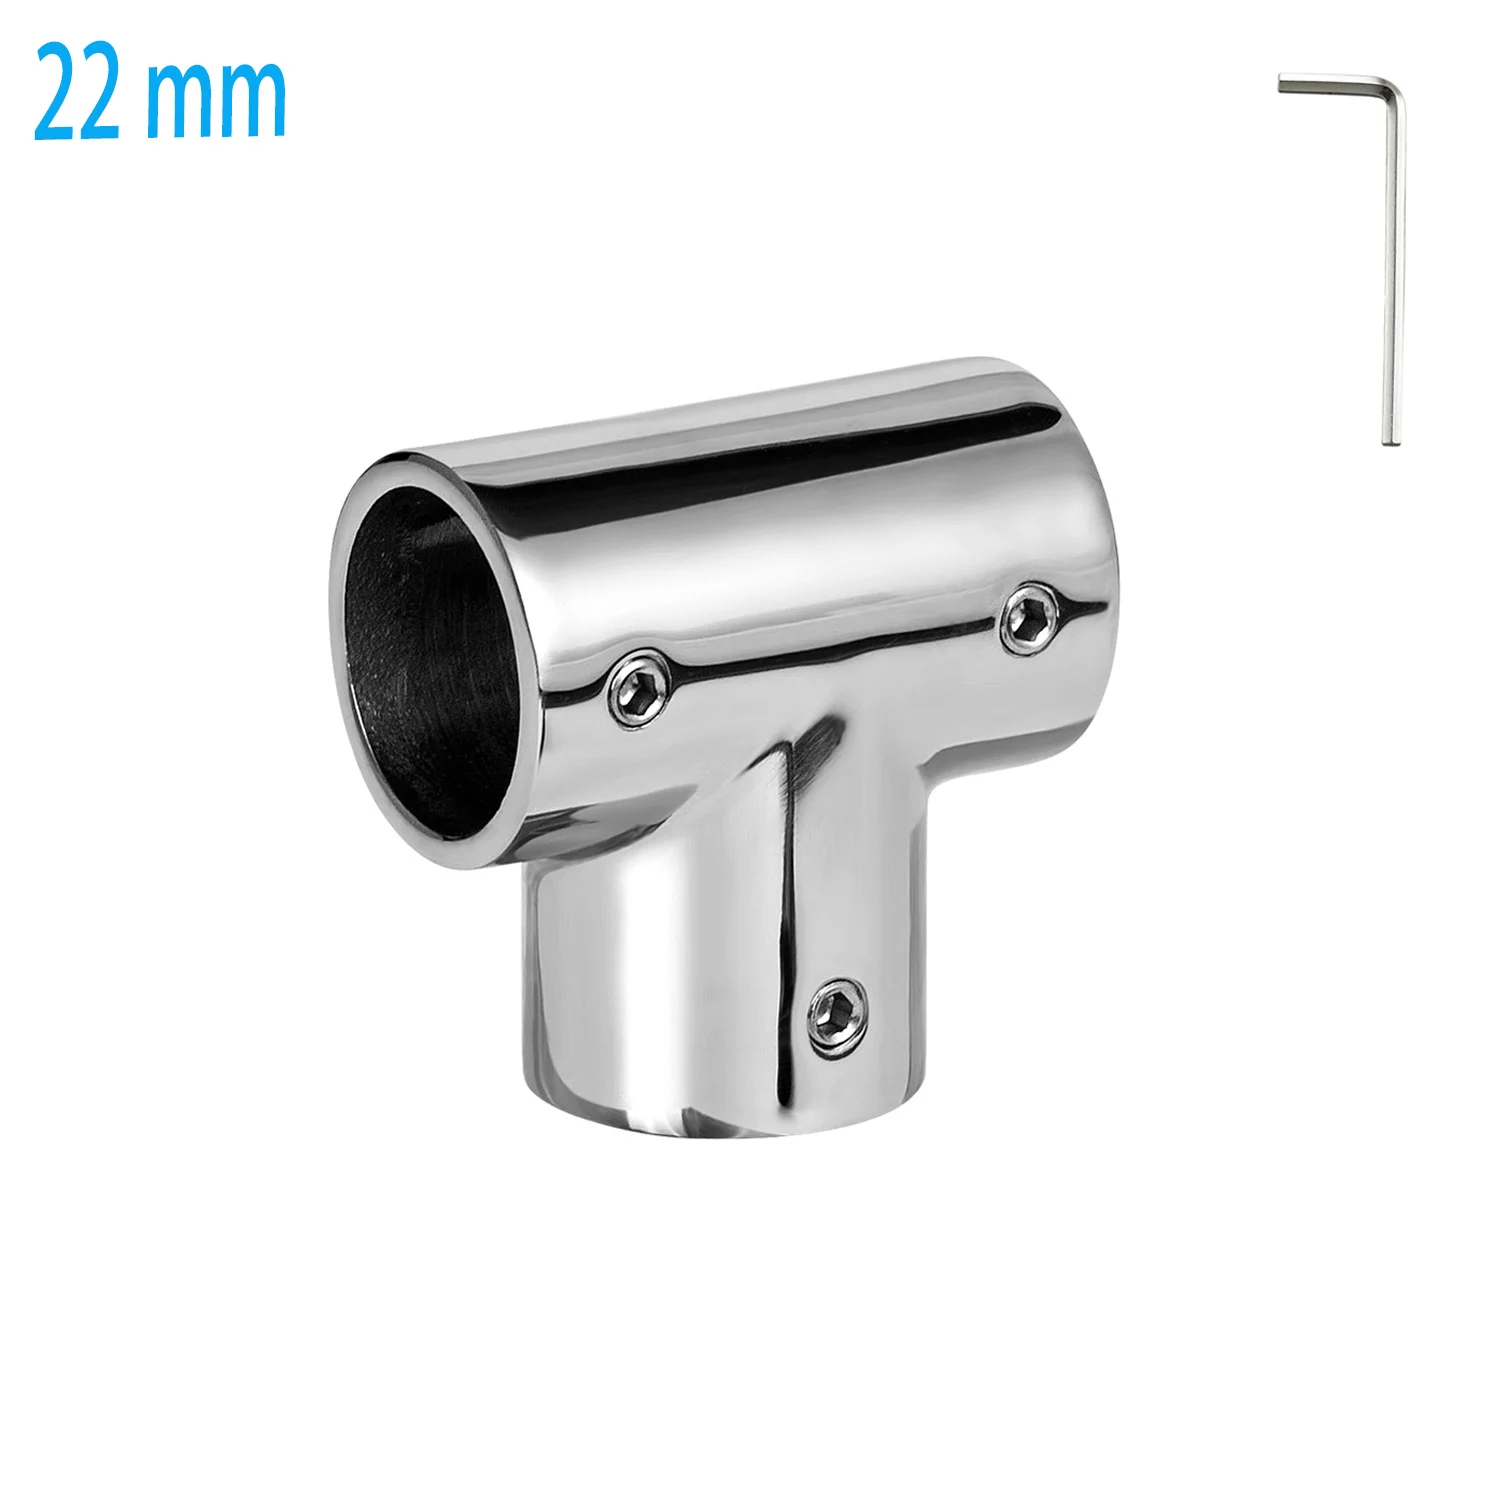 

Boat Handrail Fitting 90 Degree Tee Rail for 7/8" Tubing, 316 Stainless Steel Heavy Duty Marine Boat Railing Tee Connector